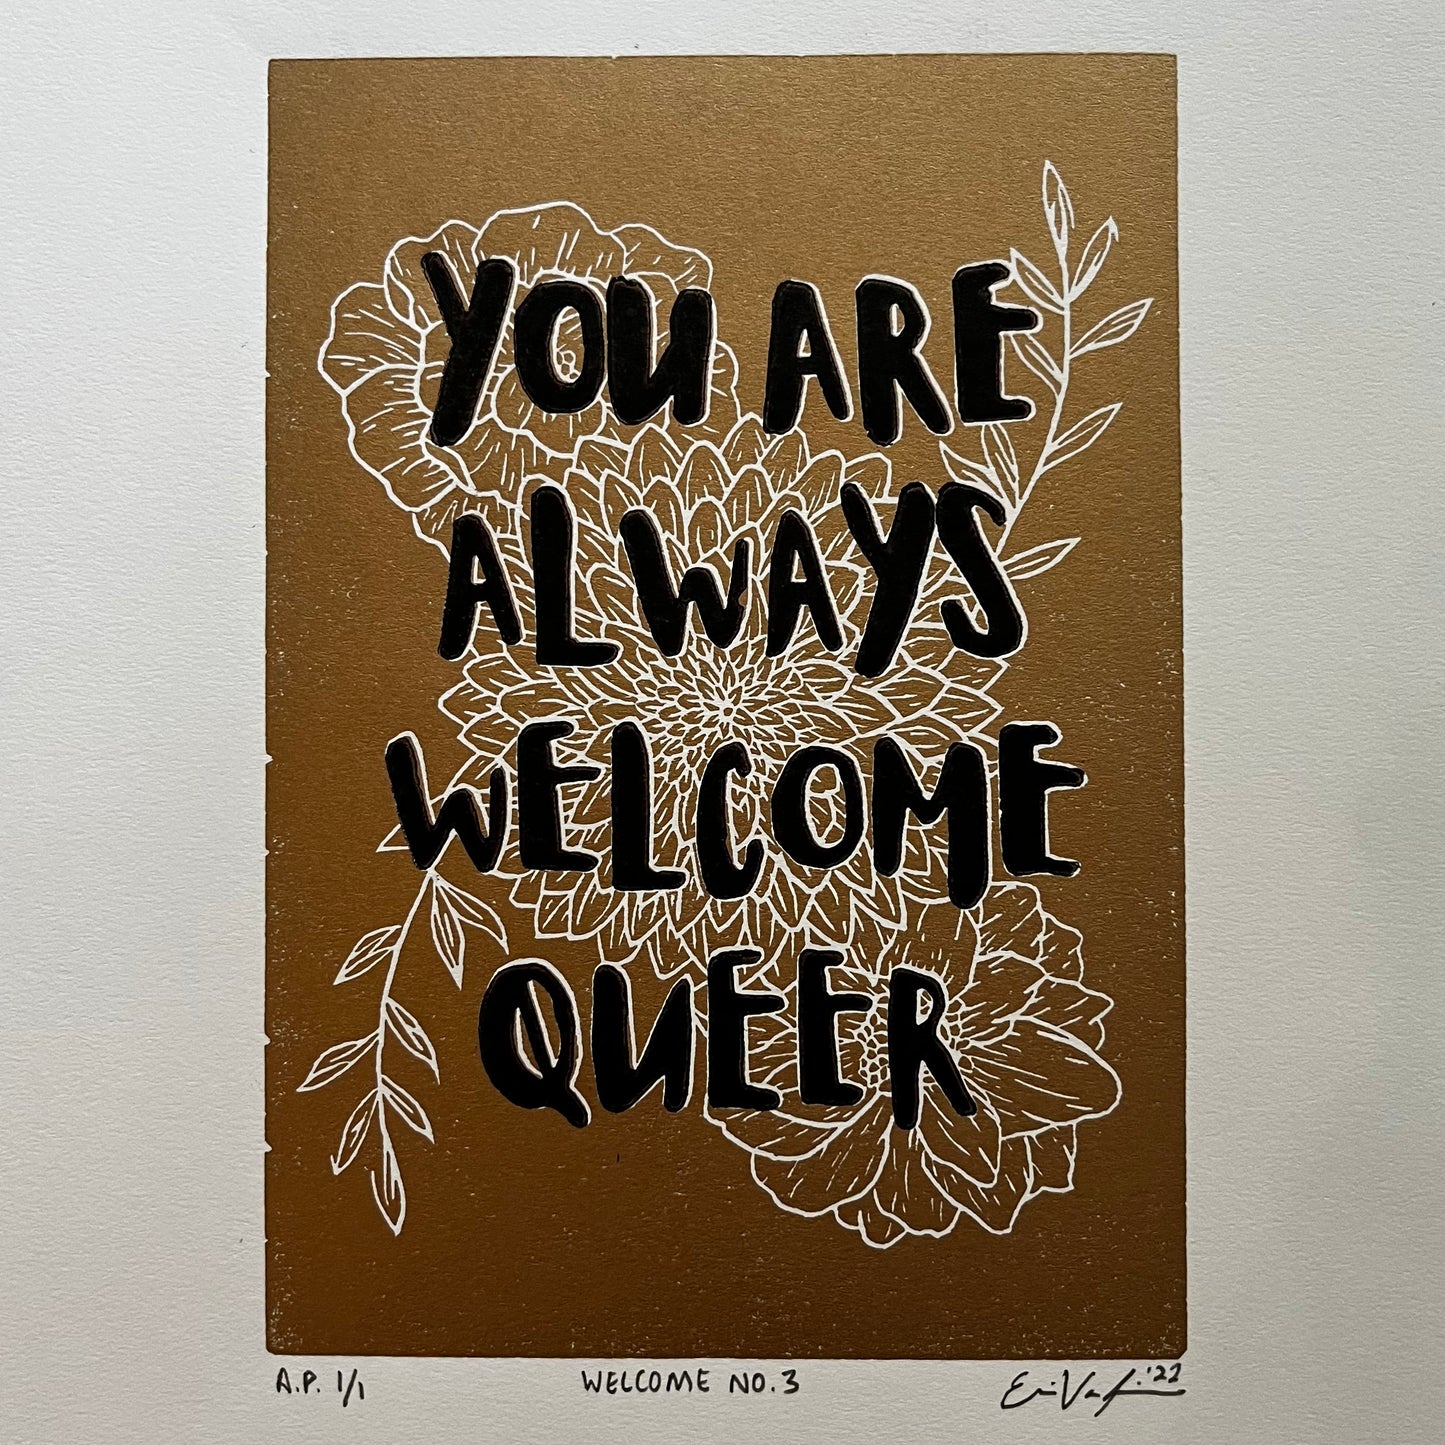 “You Are Always Welcome Queer” LINOCUT PRINT | Limited Edition